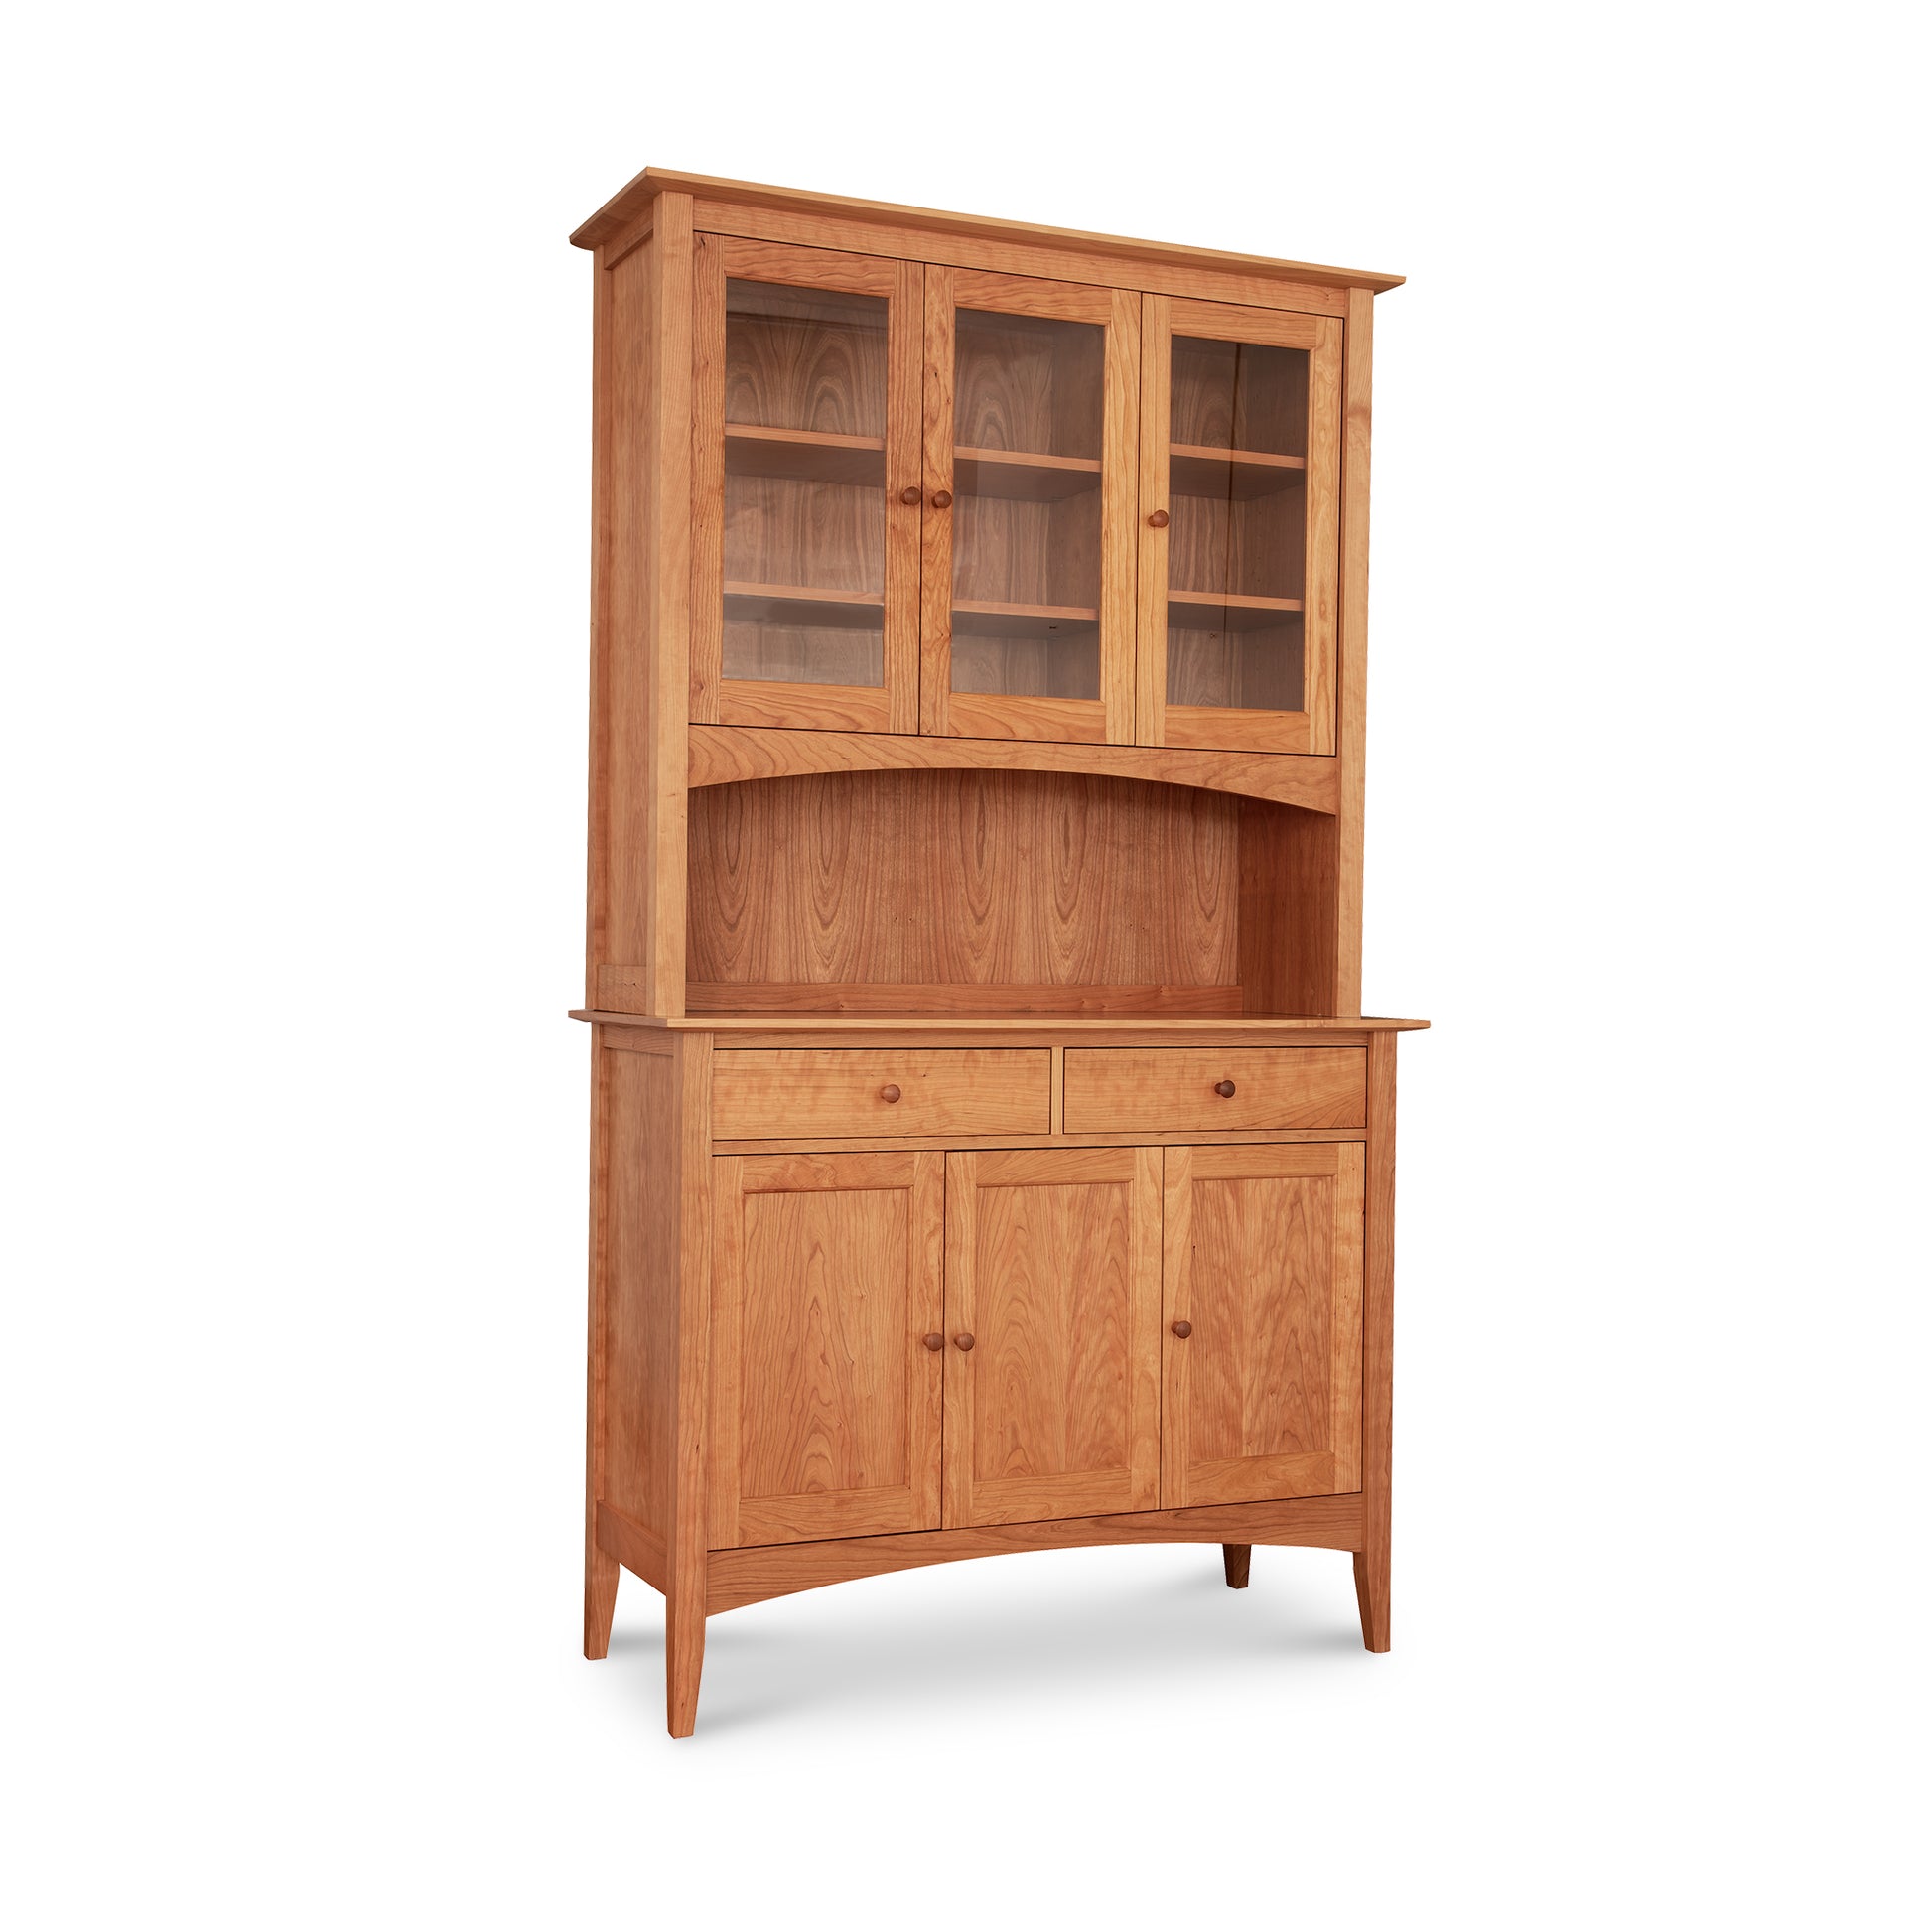 American Shaker 50" China Cabinet, designed in the American Shaker style by Maple Corner Woodworks, with upper glass-fronted doors and lower wooden doors, isolated on a white background.